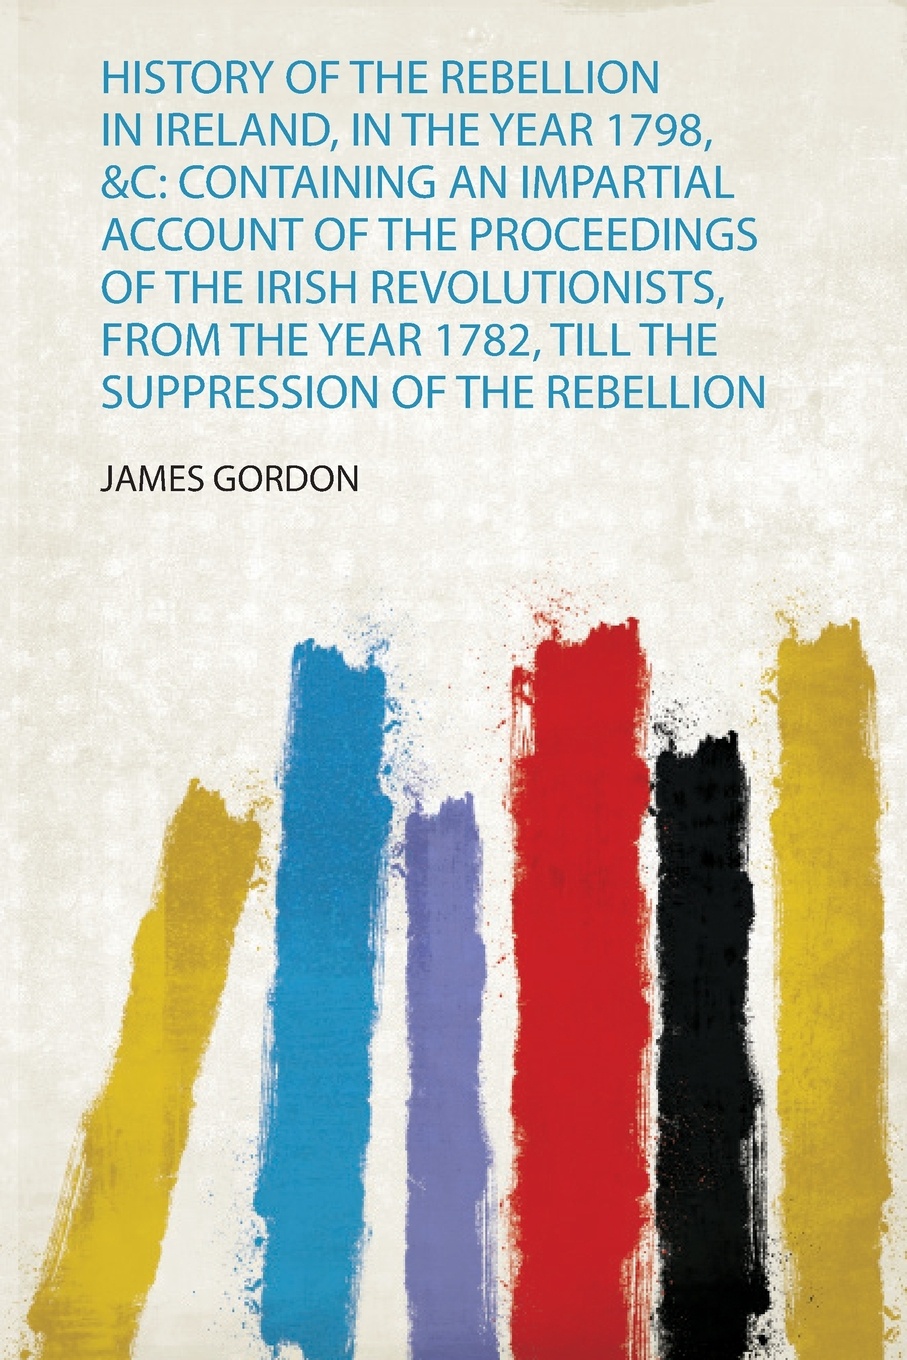 History of the Rebellion in Ireland, in the Year 1798, &C. Containing an Impartial Account of the Proceedings of the Irish Revolutionists, from the Year 1782, Till the Suppression of the Rebellion